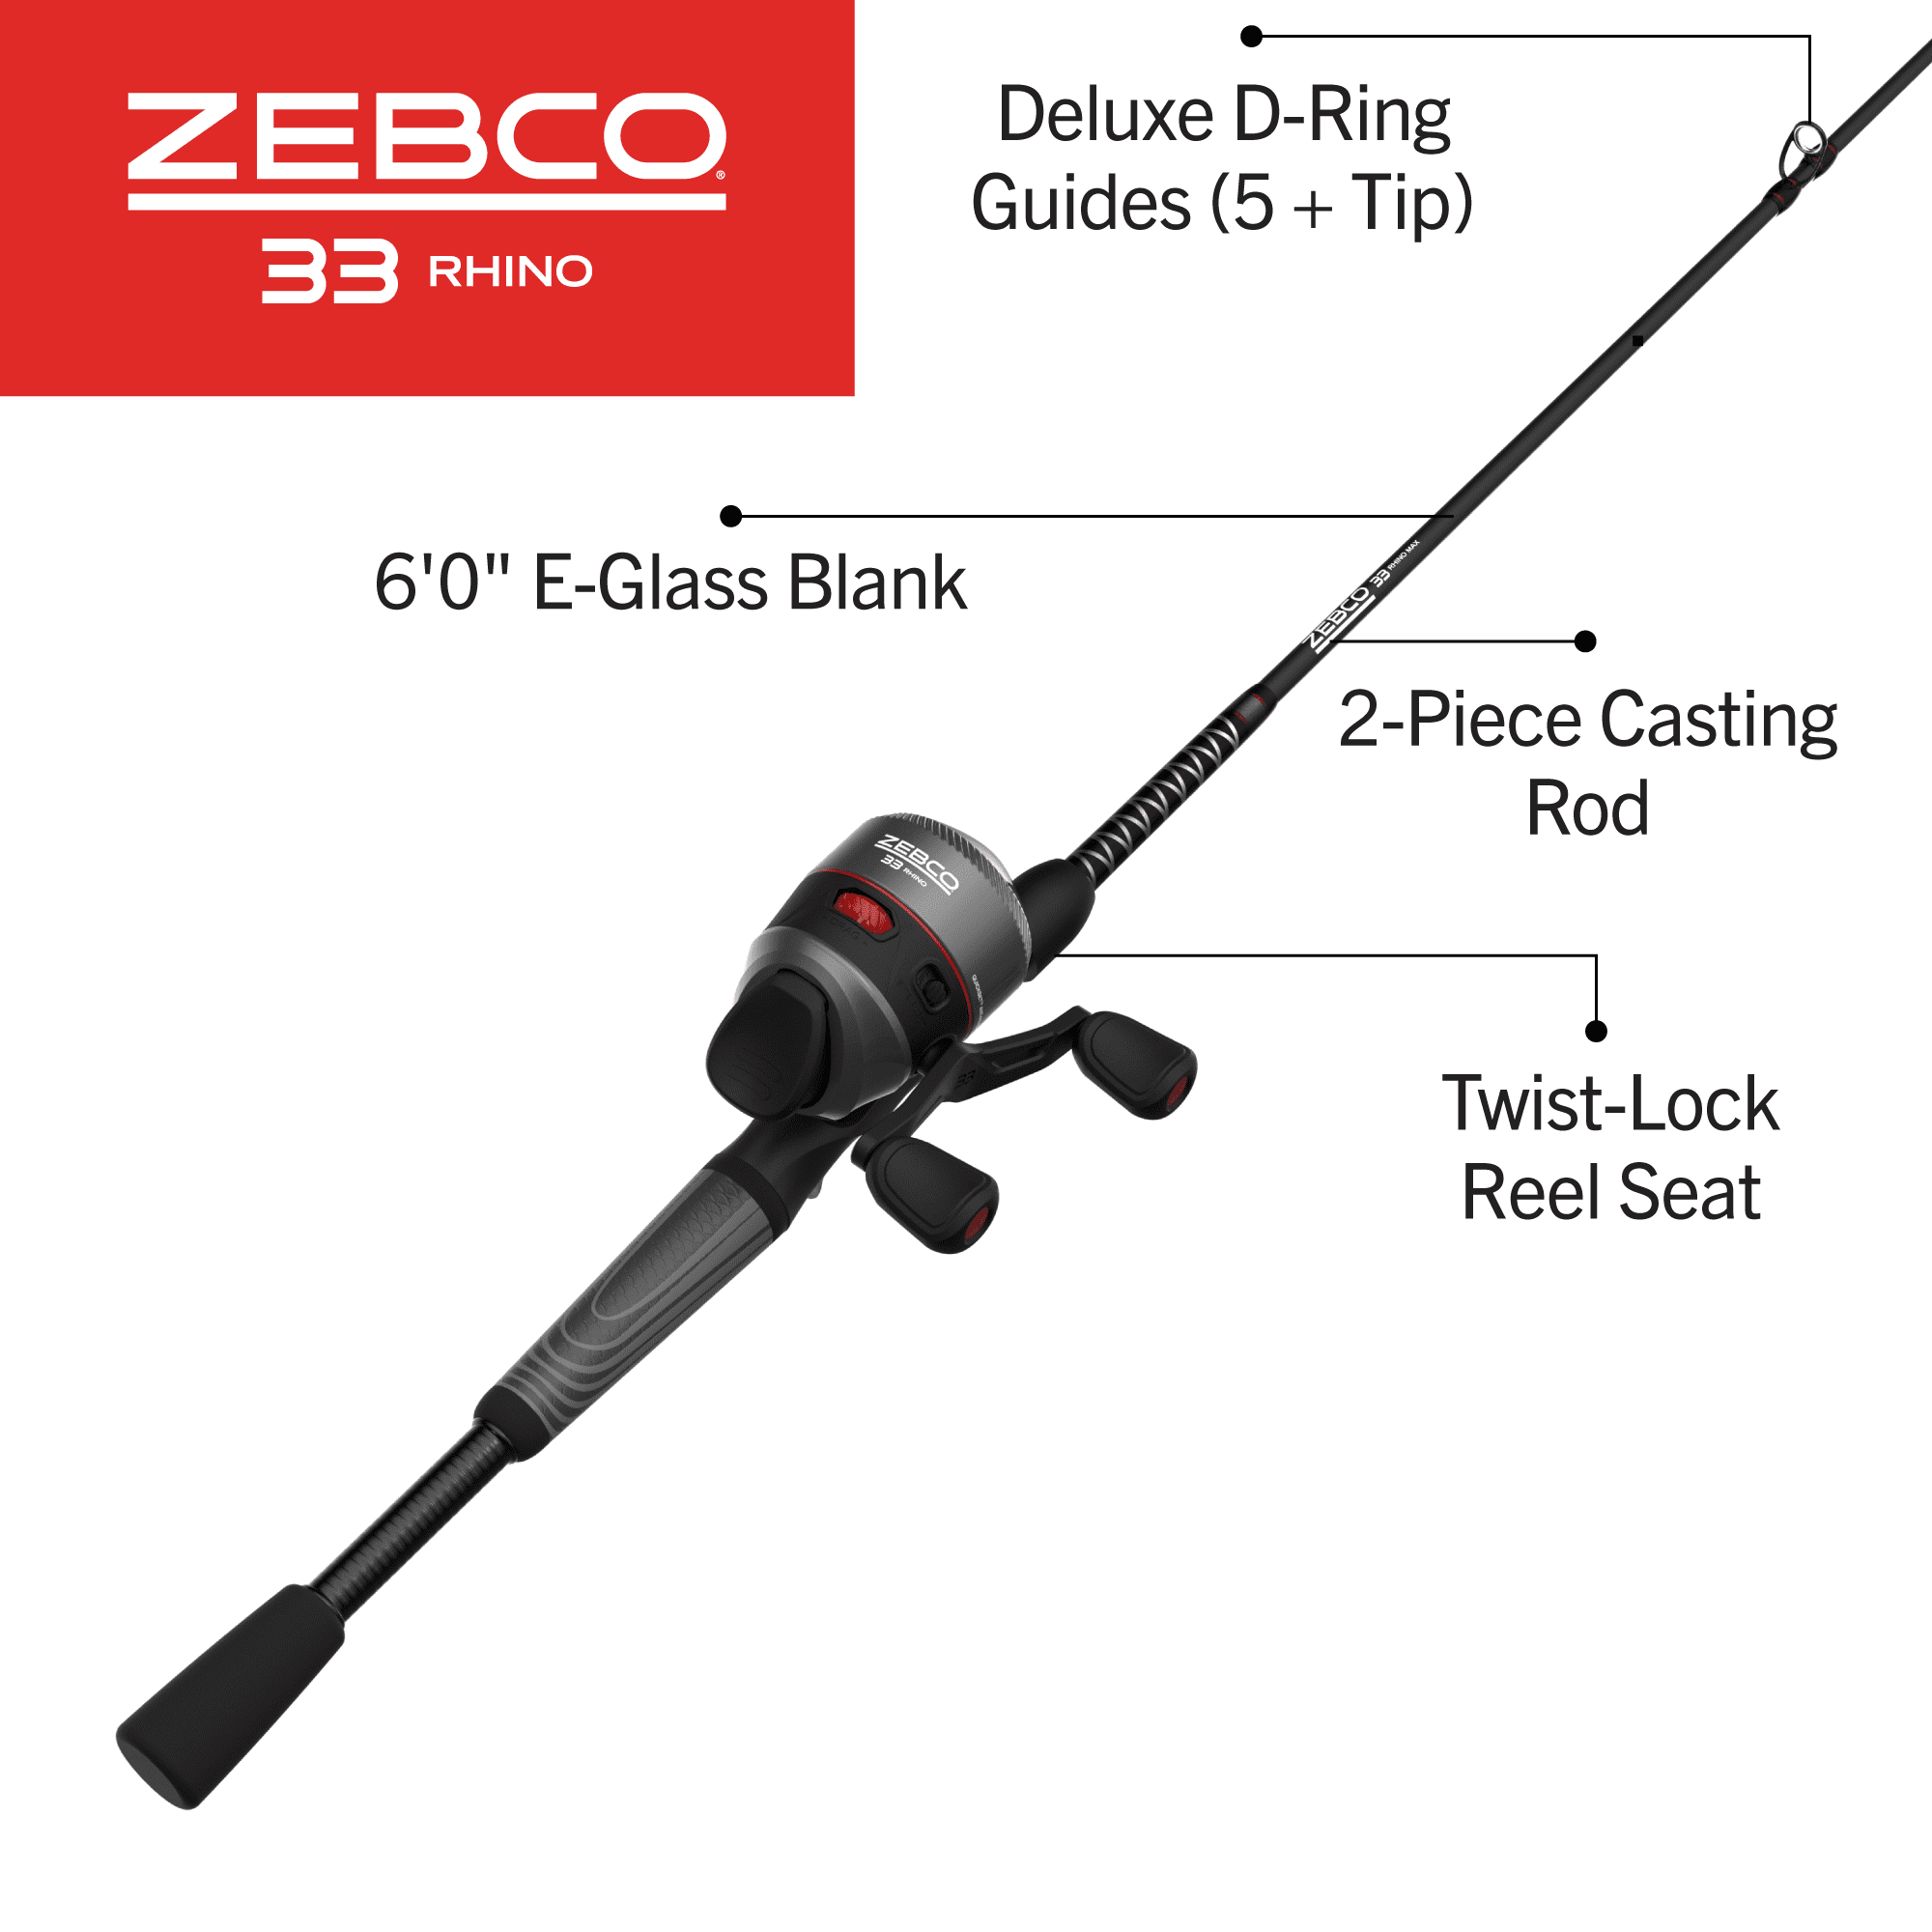 Zebco 33 Rhino Spincast Reel and Fishing Rod Combo, 6-Foot Rod, Size 30  Reel, Gray/Black